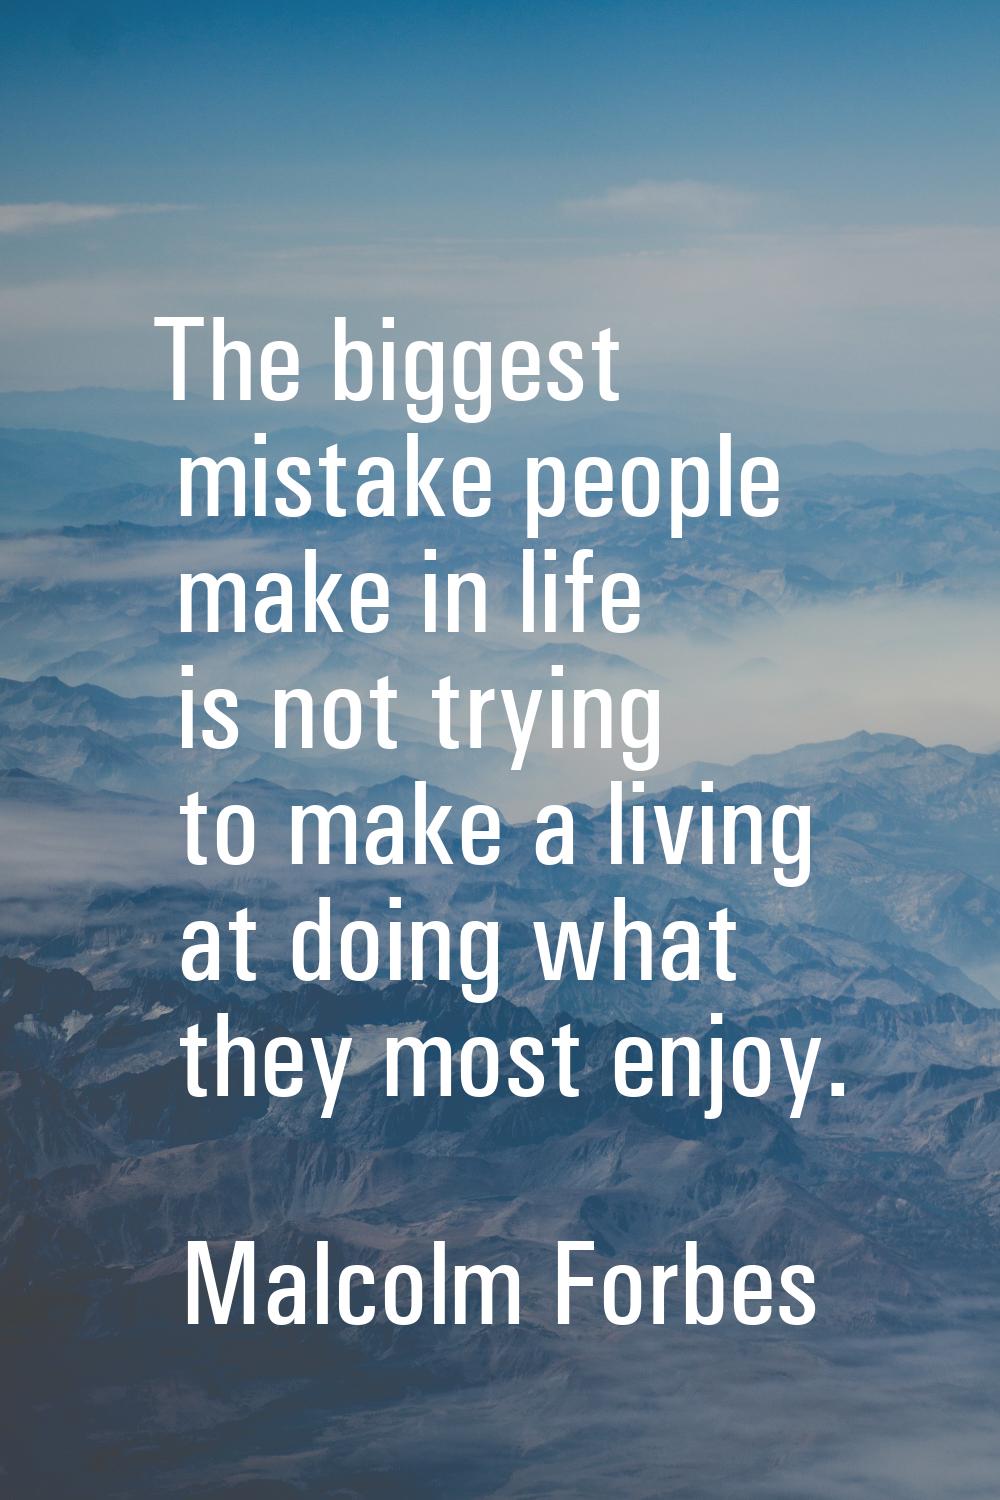 The biggest mistake people make in life is not trying to make a living at doing what they most enjo